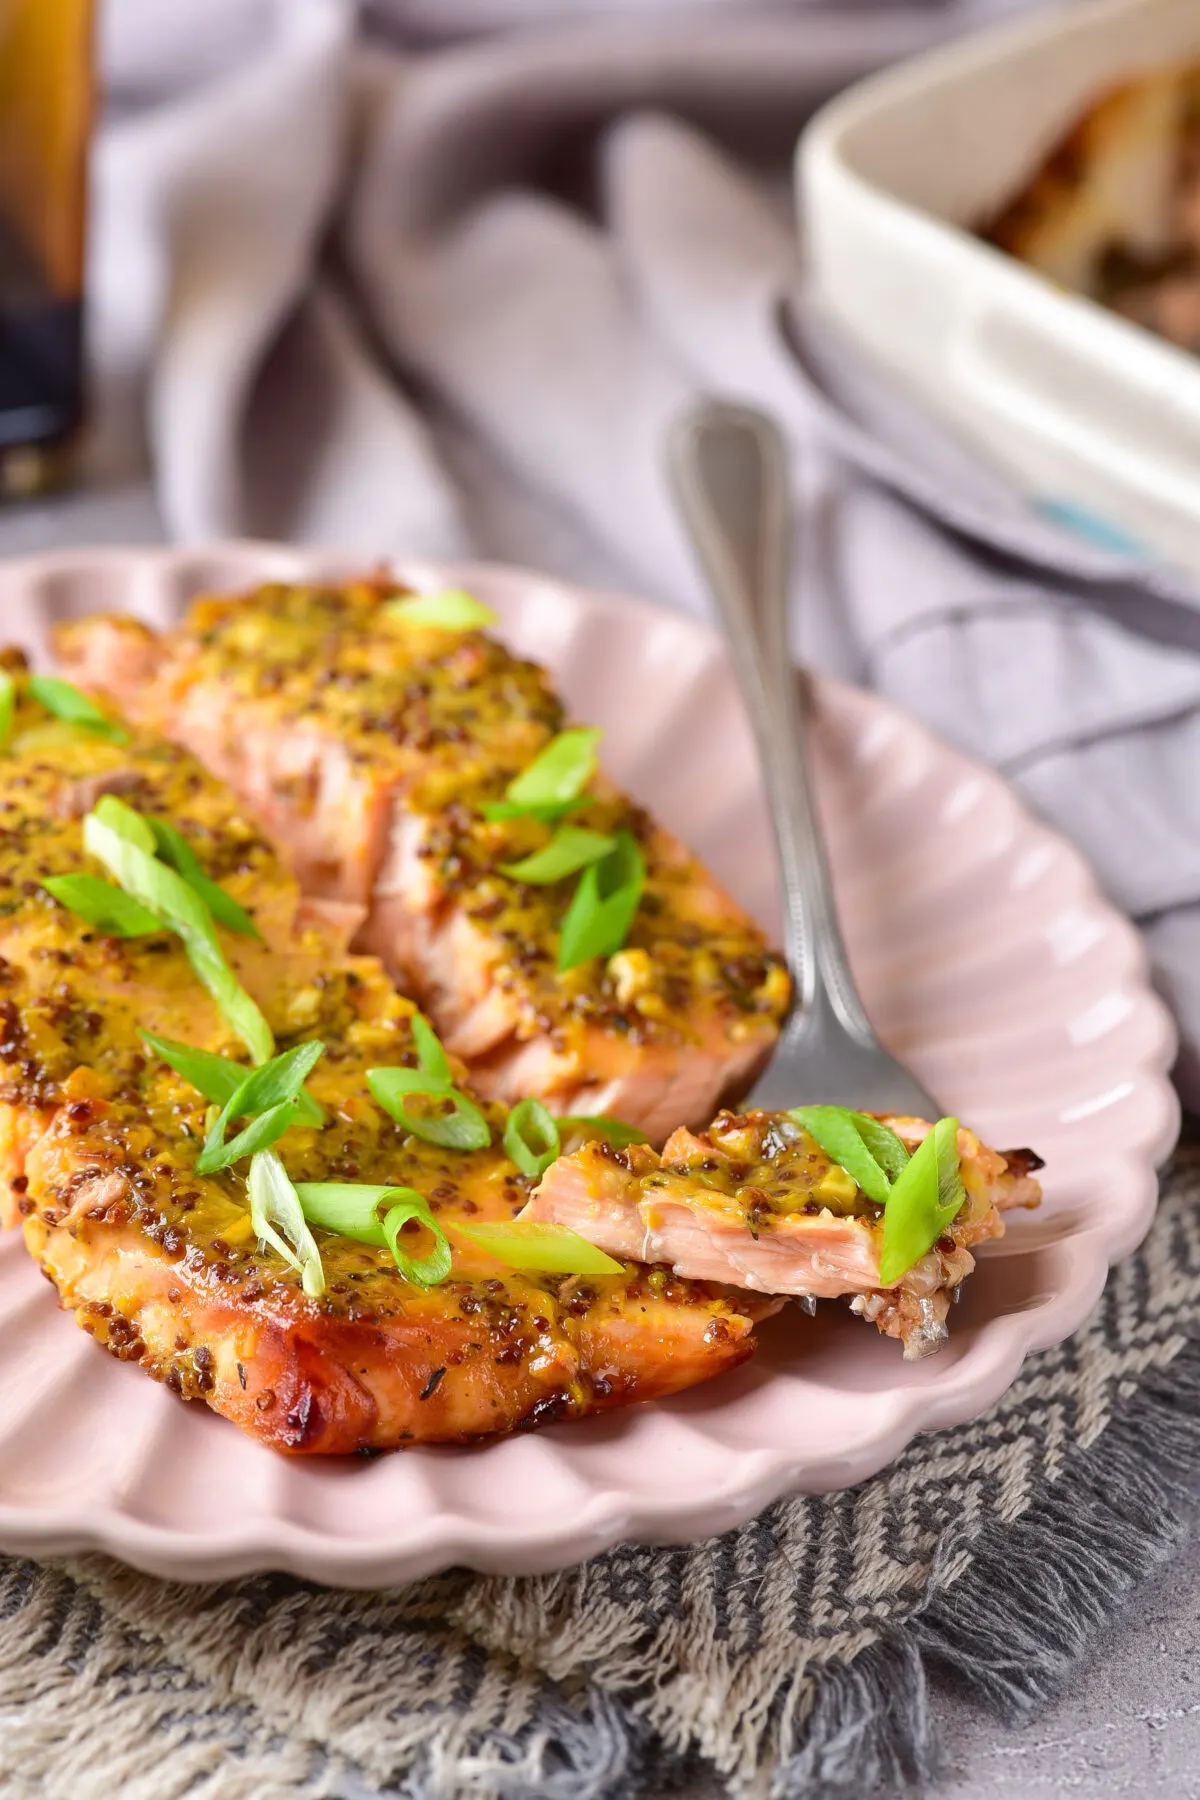 Dive into our Baked Honey Mustard Salmon recipe - a deliciously simple dinner idea! Perfectly seasoned for a mouthwatering meal every time.